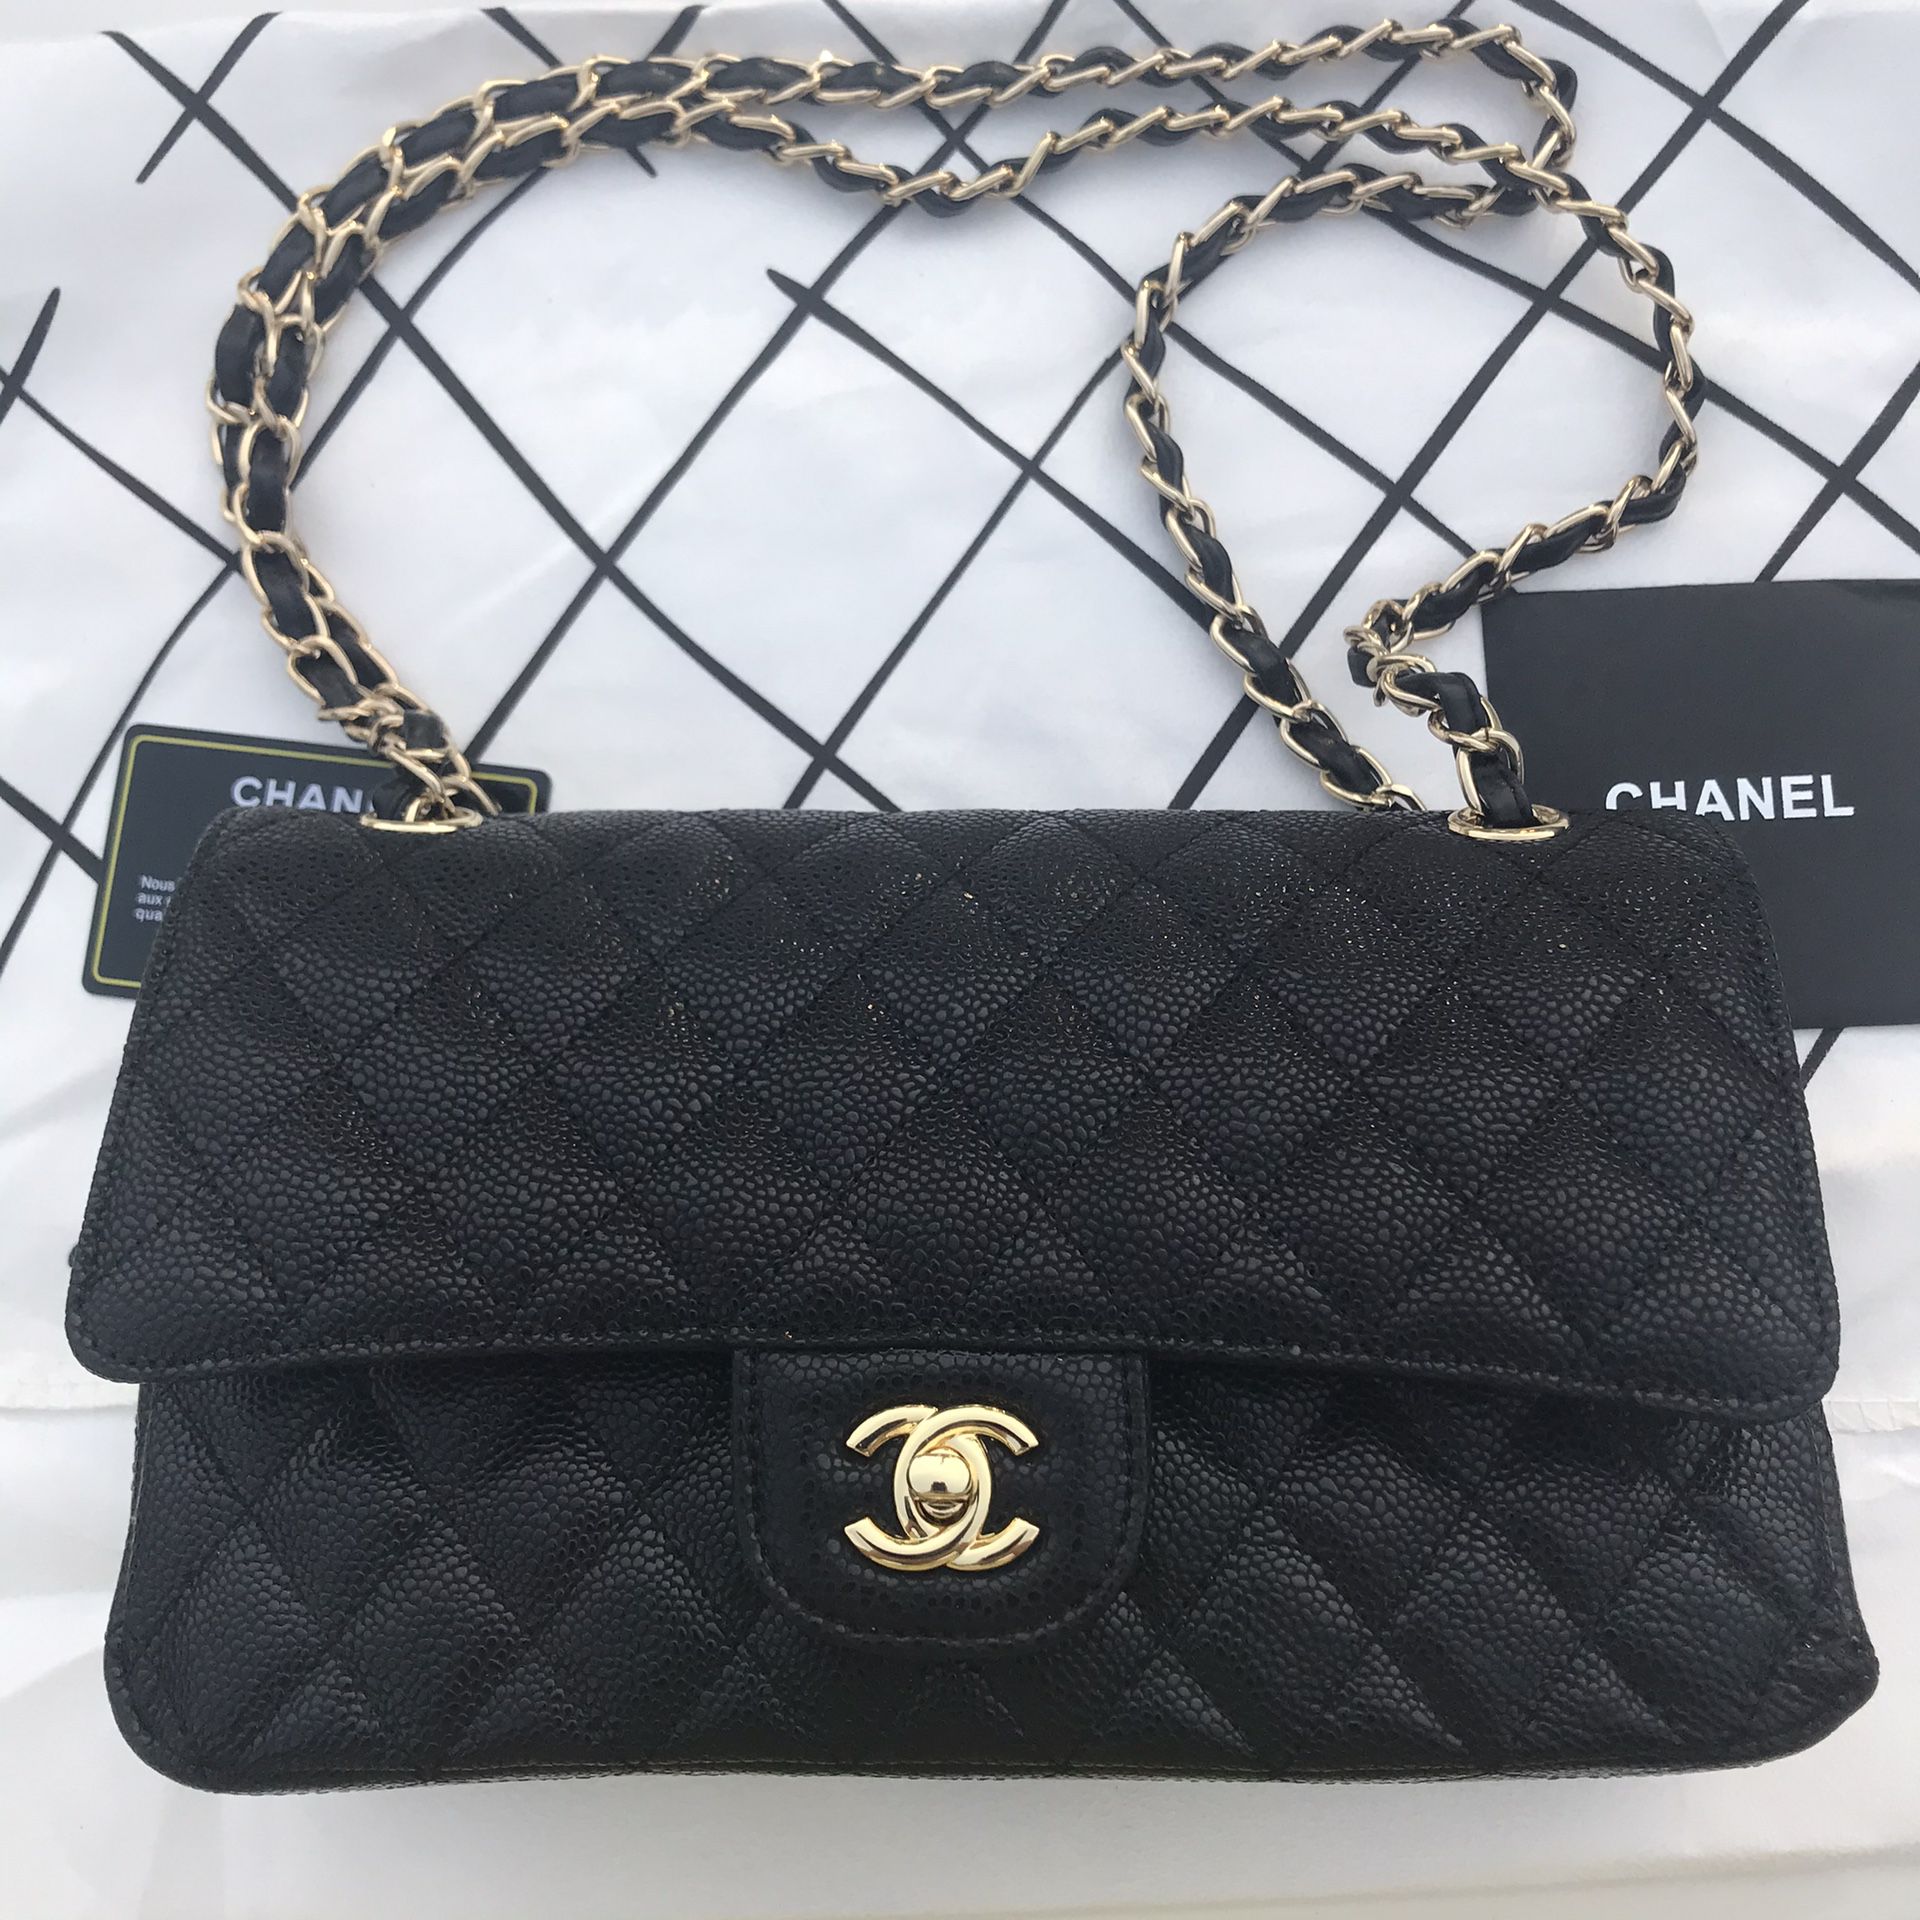 Black Chanel quilted bag